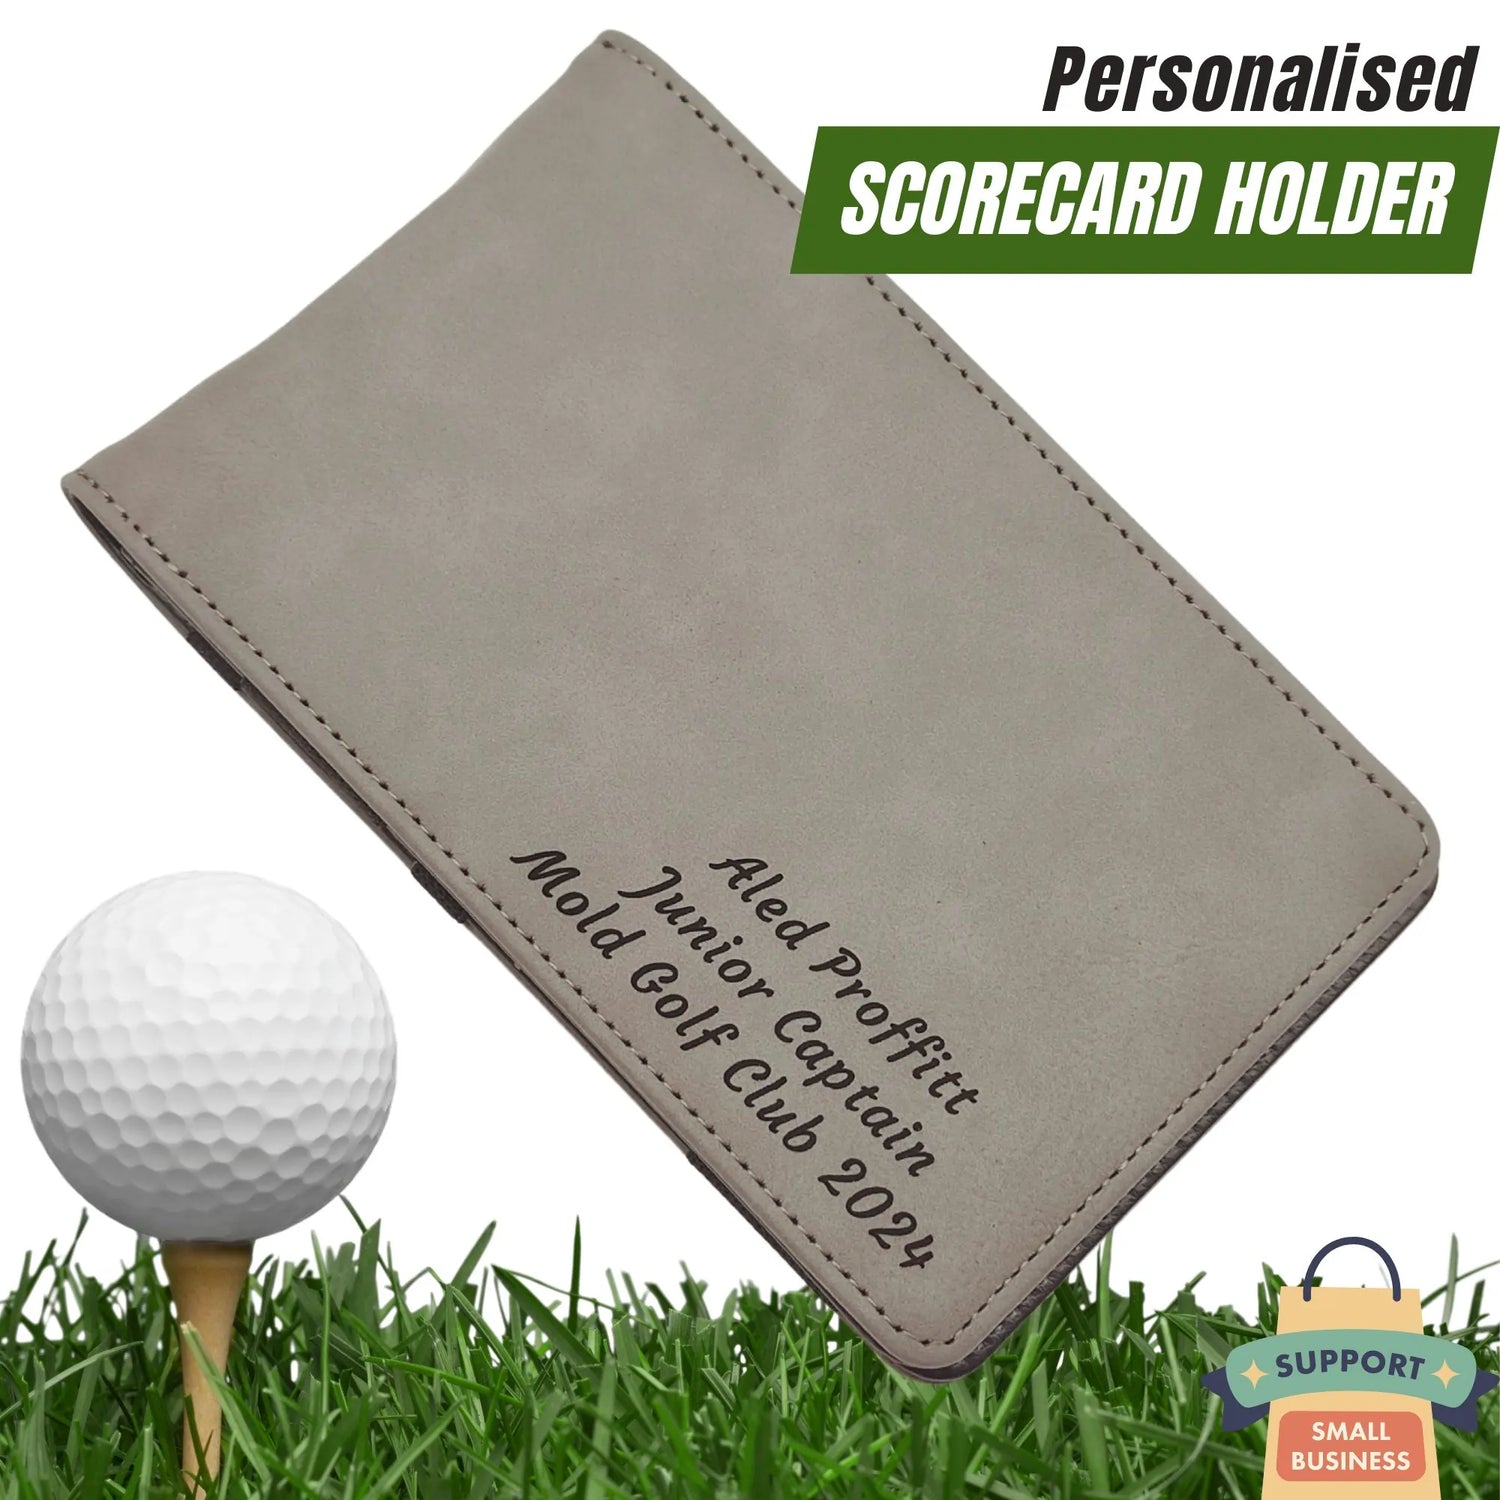 Personalised Golf Scorecard Holder | Grey PU Leather with Black Engraving | Suitable for all Golfers |  Birthday | Christmas Gift, Present